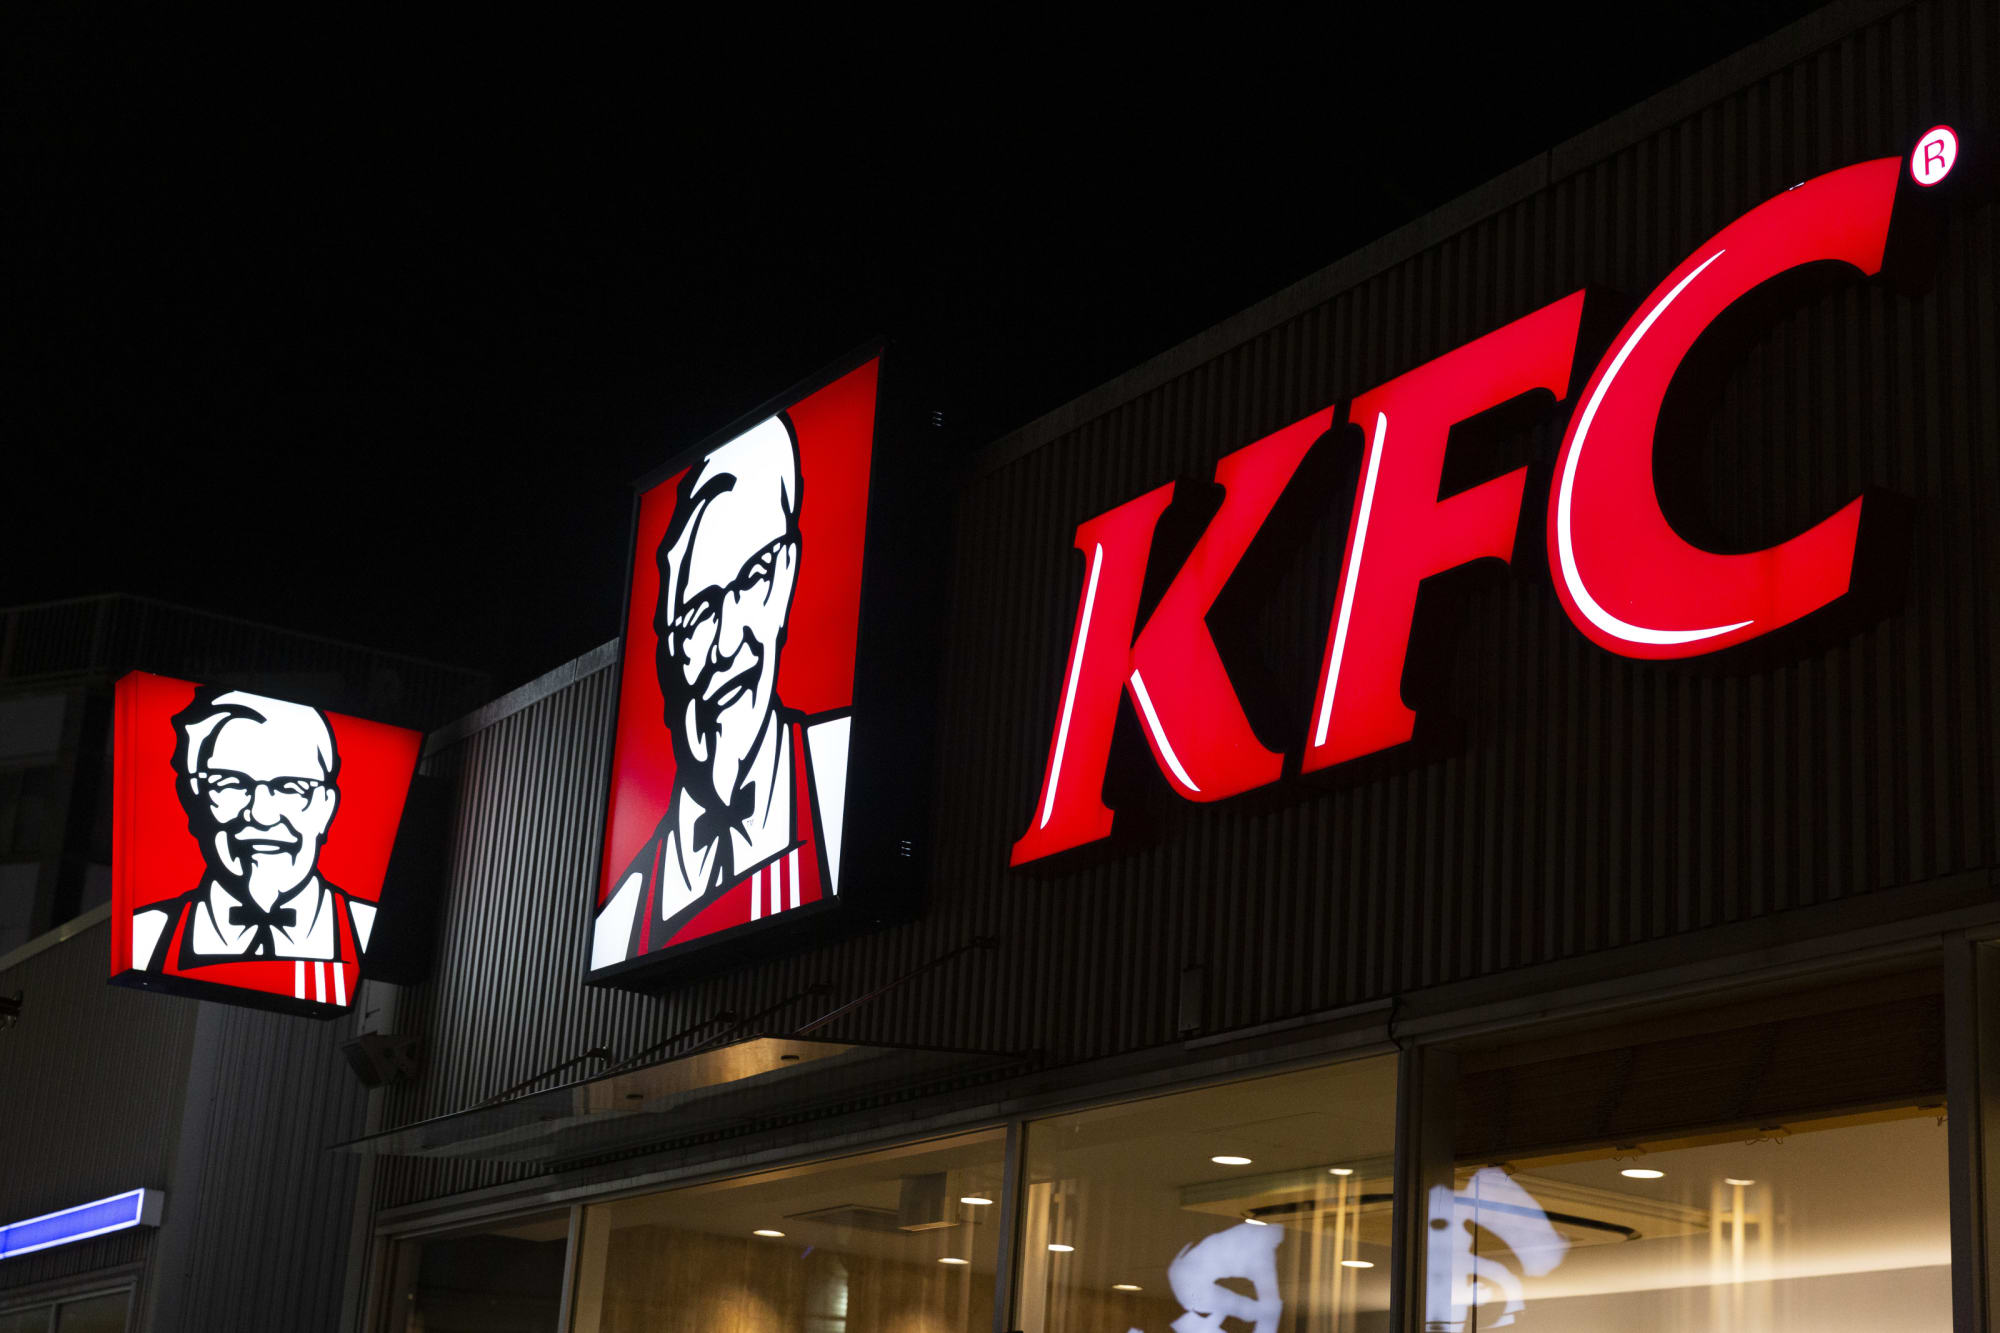 When are KFC restaurants open on New Year’s Day 2021?